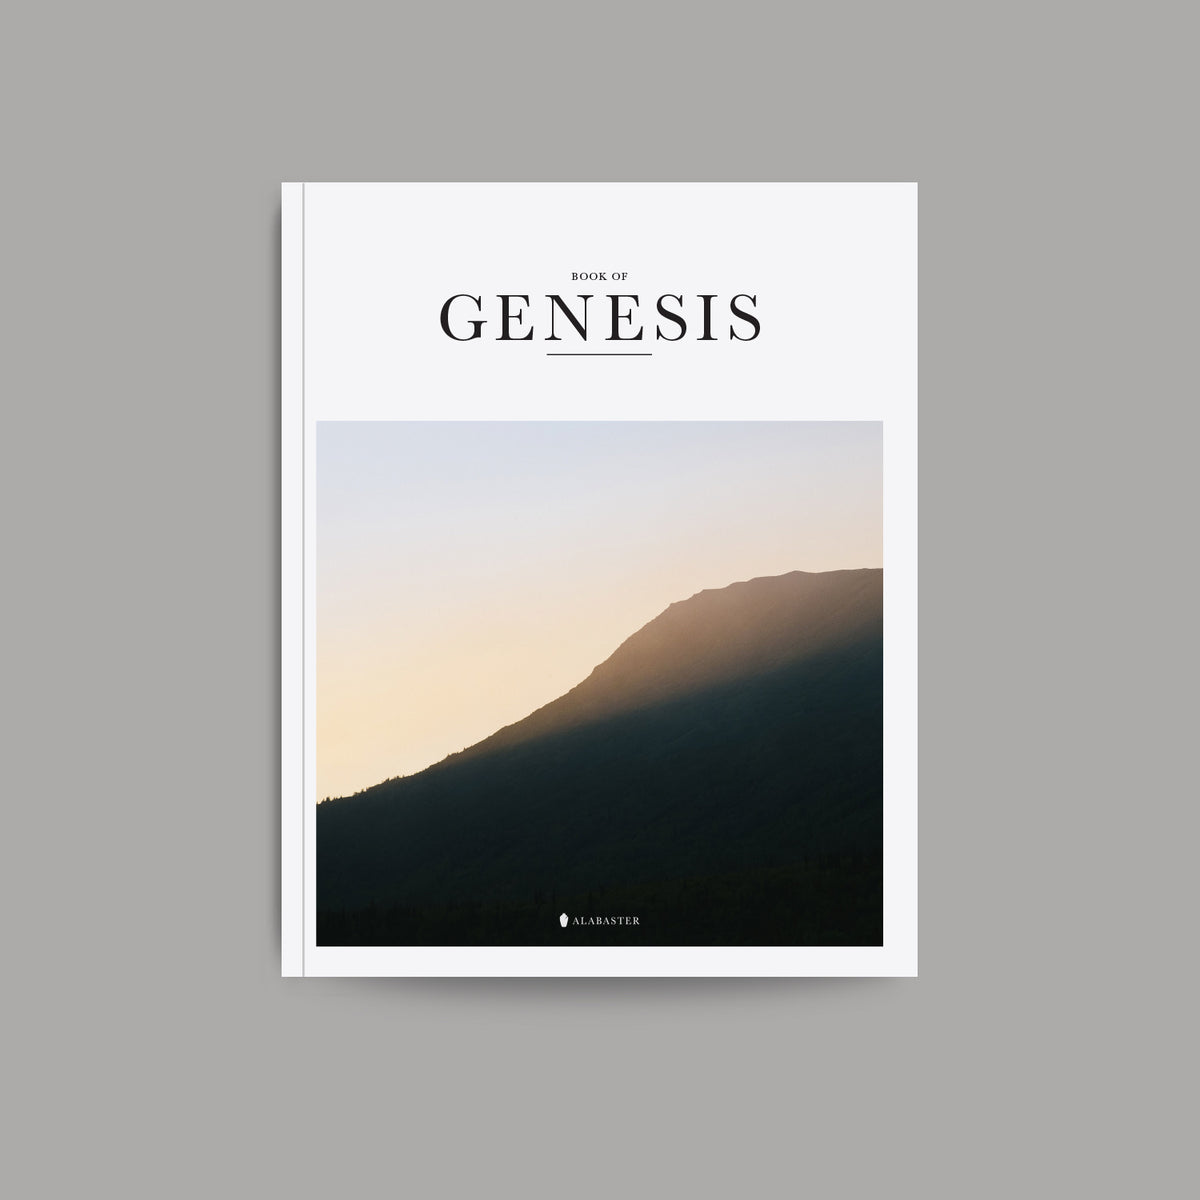 Bible book Genesis with mountain on cover